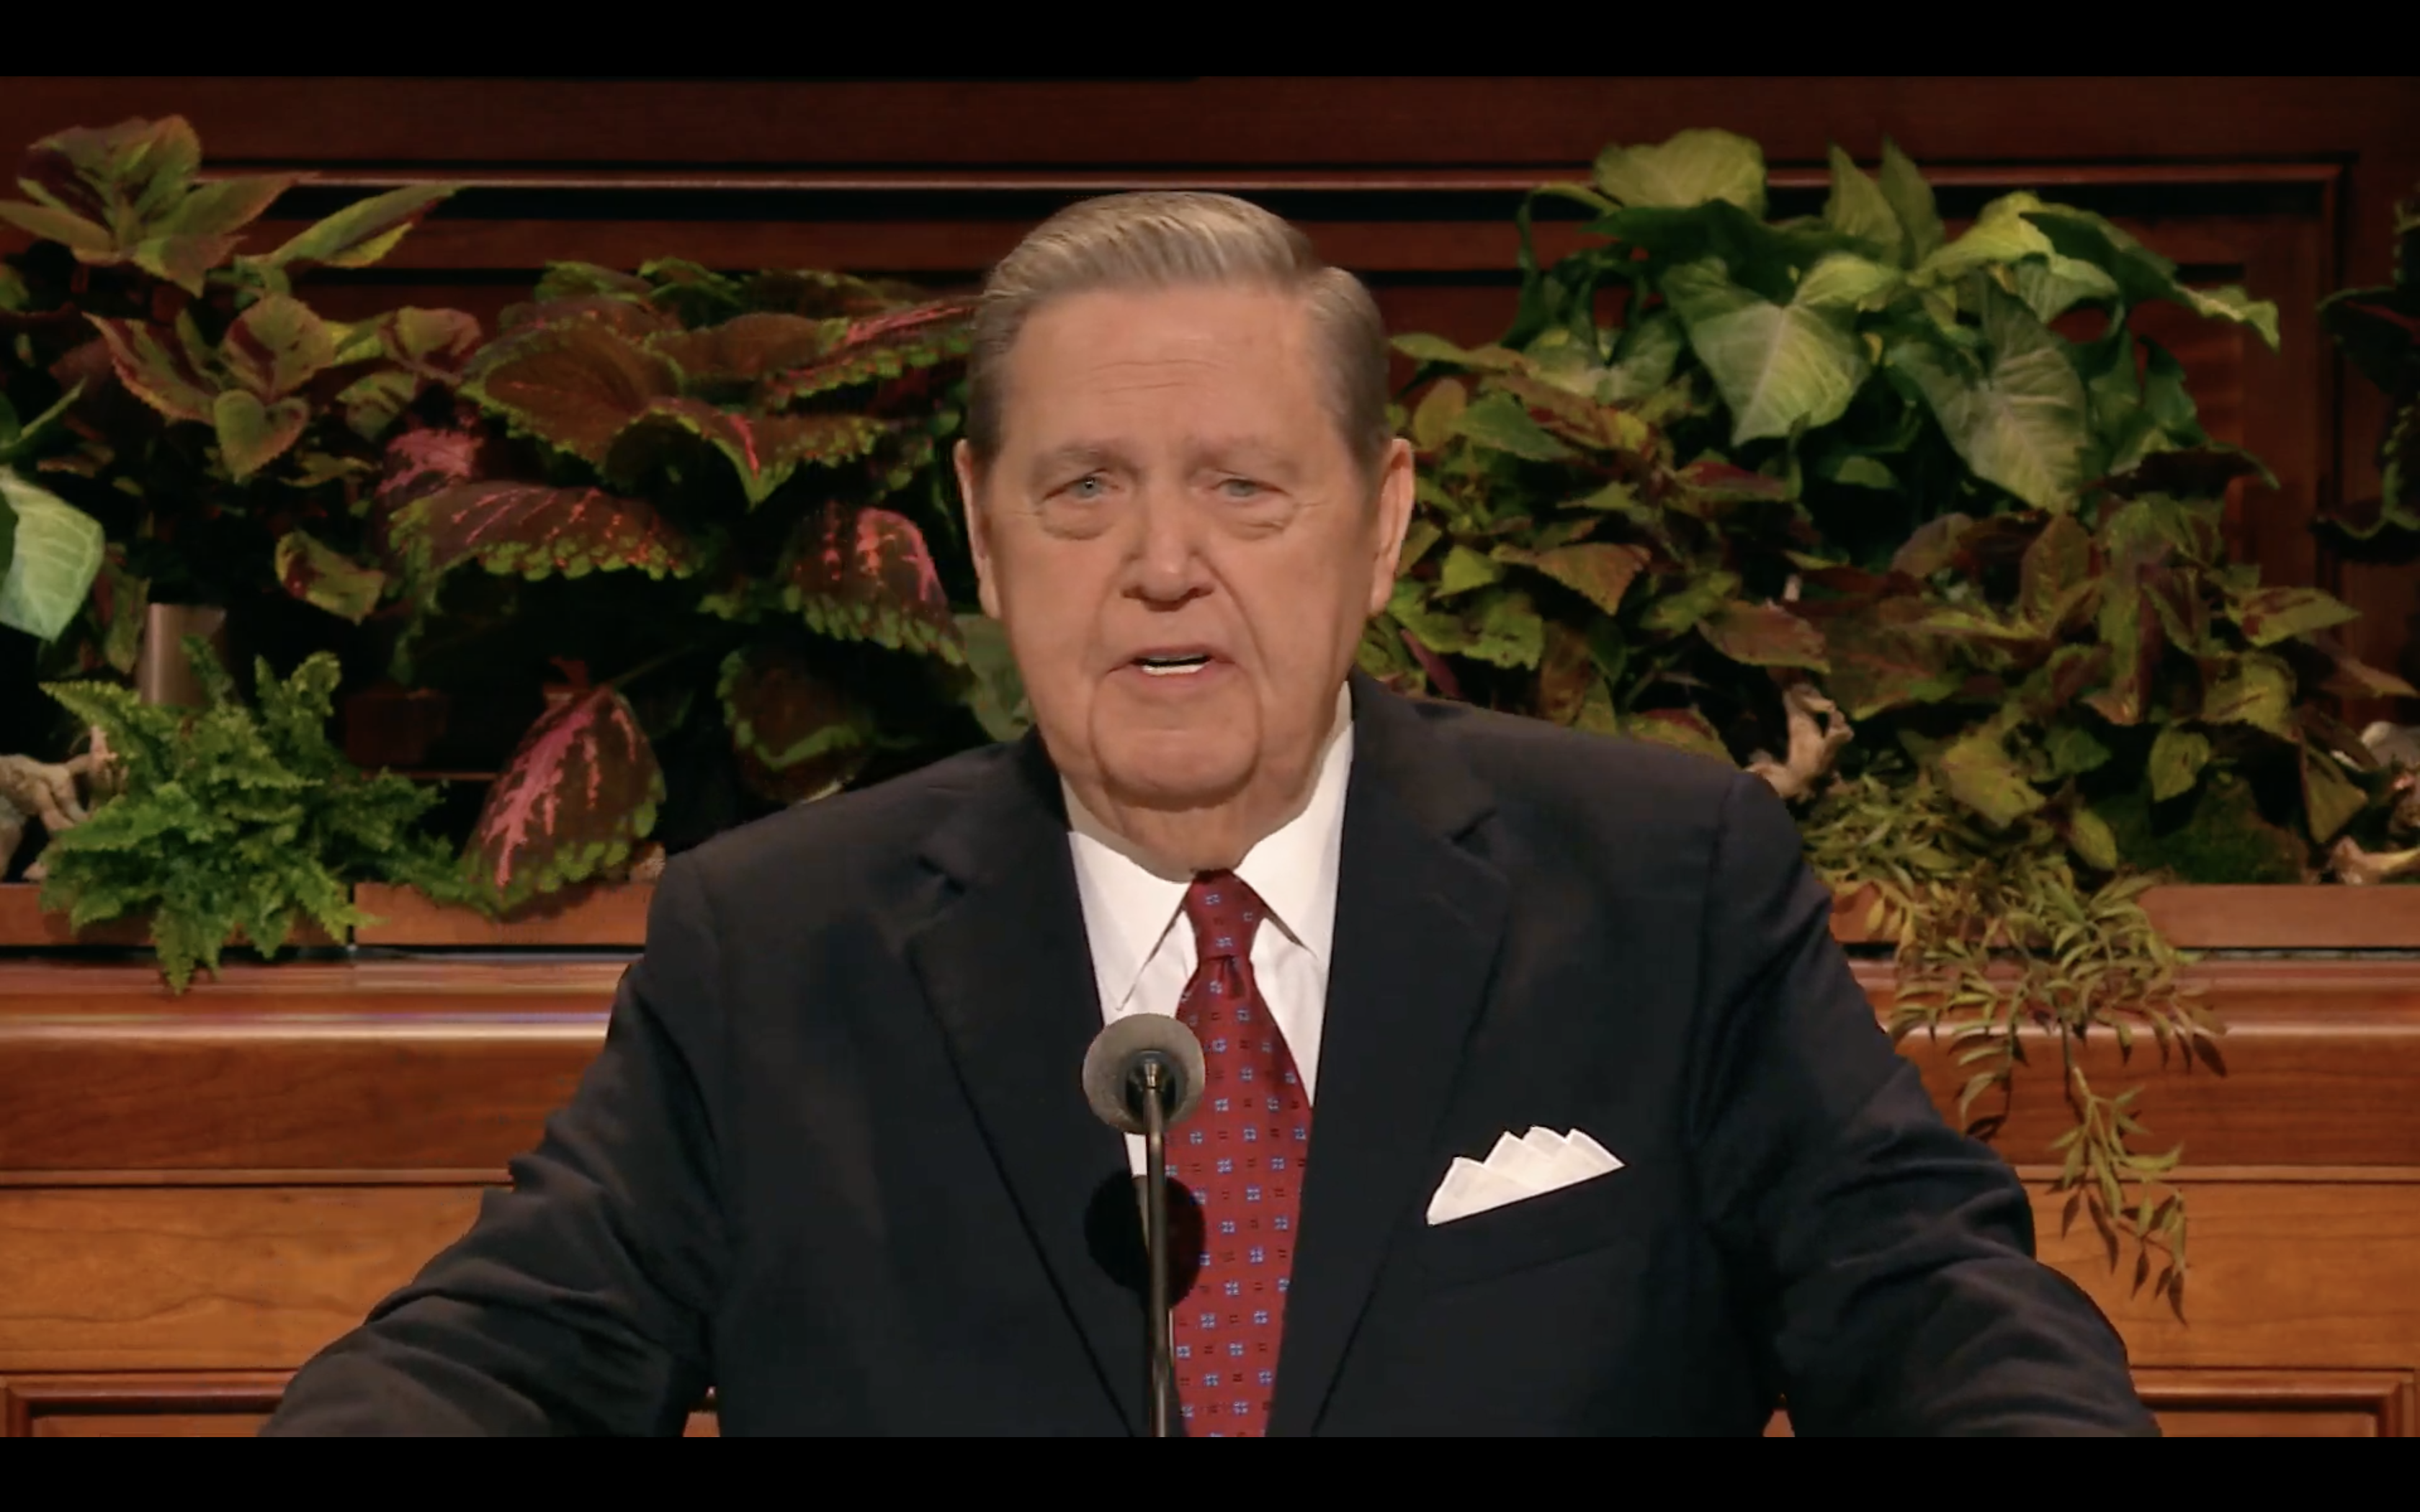 Elder Holland's opening reminder Christ is the center of conference